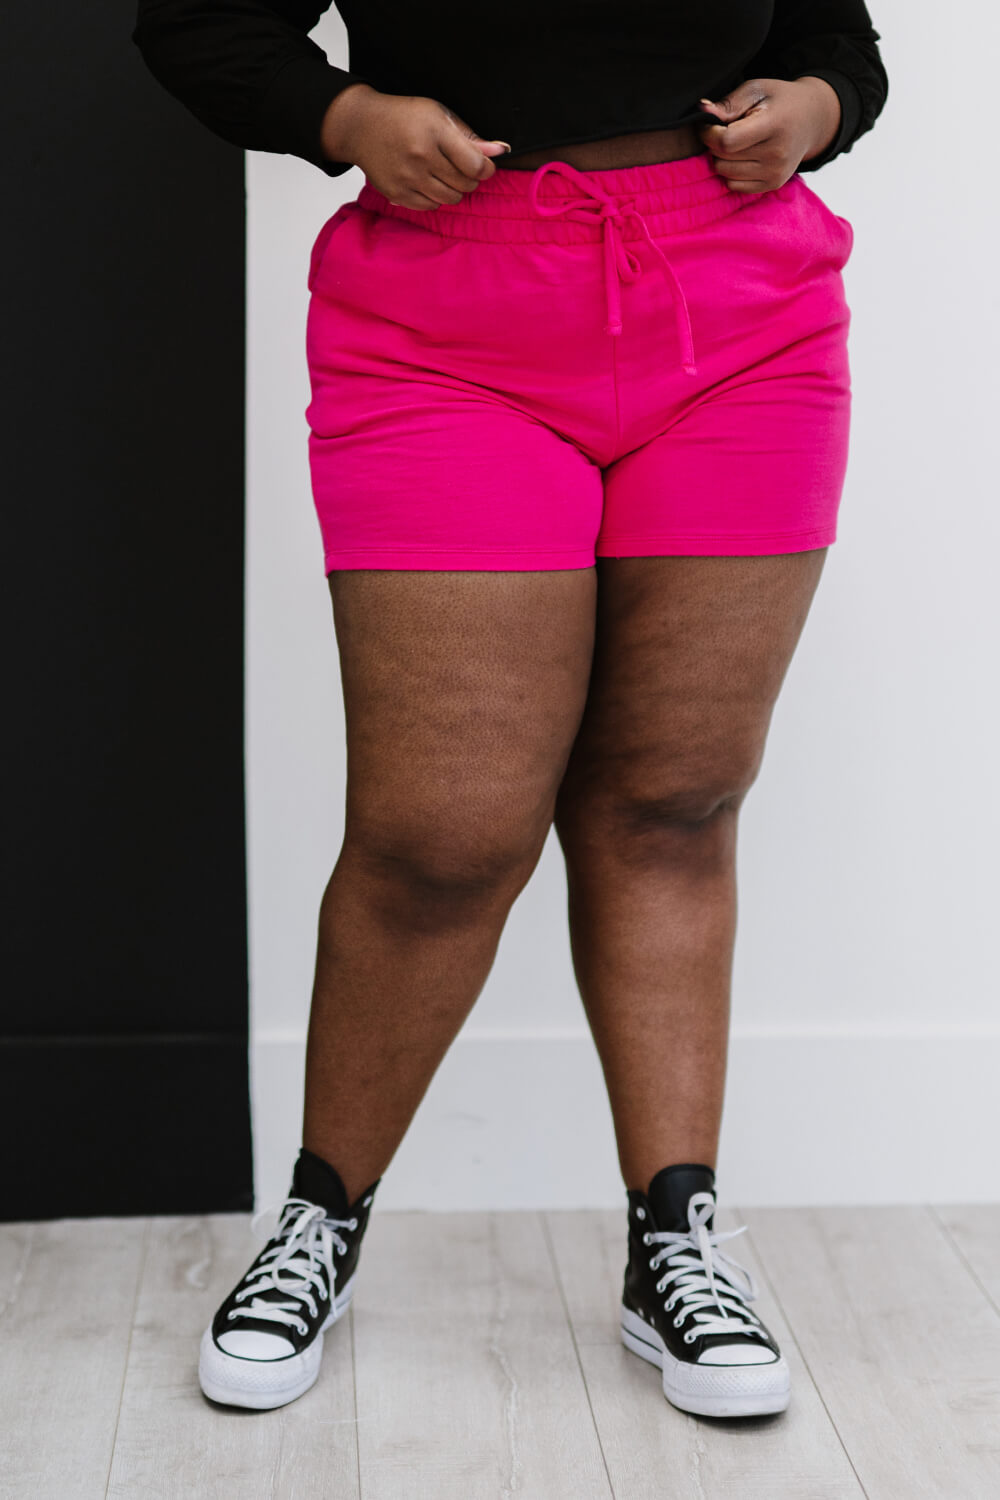 Just Chillin' Full Size Run Sweat Shorts in Pink